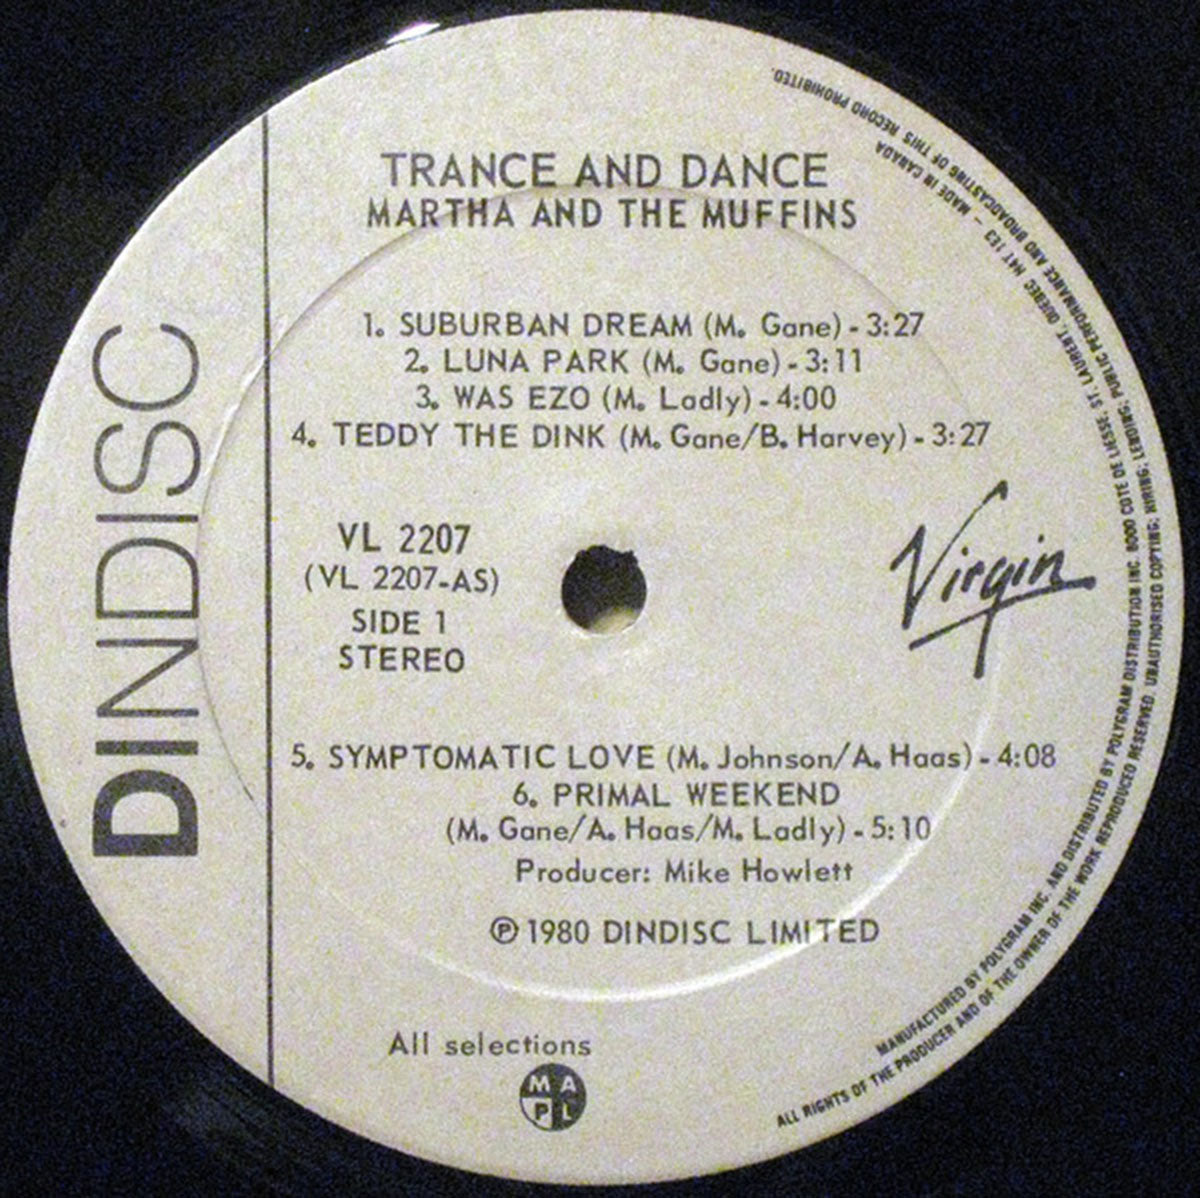 Martha And The Muffins – Trance And Dance - 1980